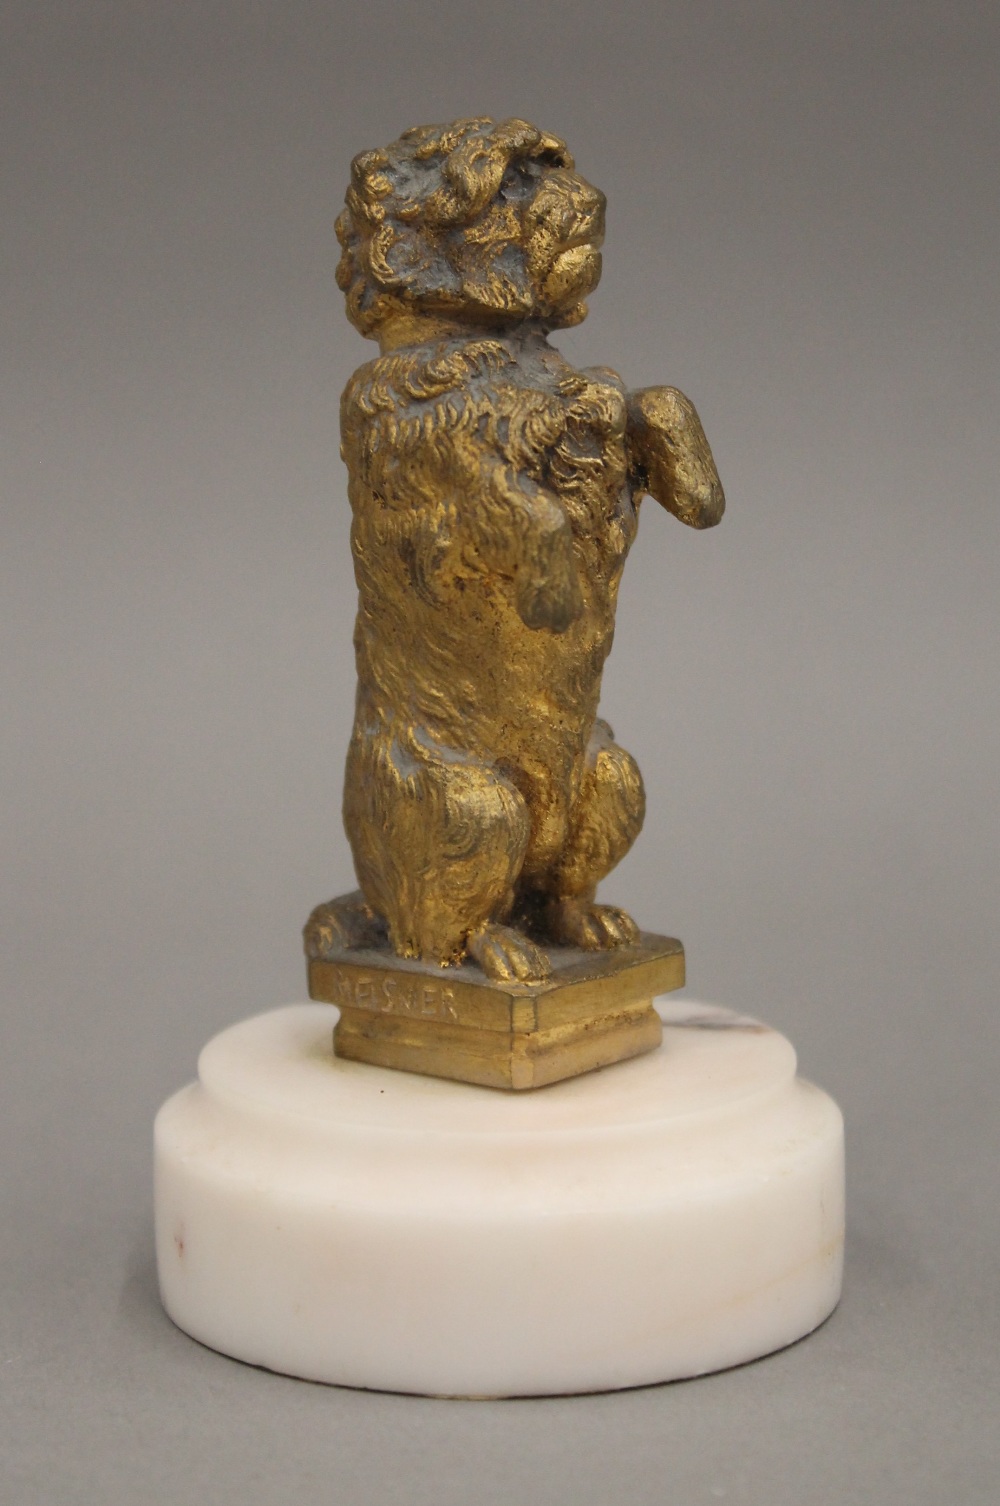 A 19th century gilded bronze figure of a dog, signed ''Meisner''. 9.5 cm high. - Image 2 of 5